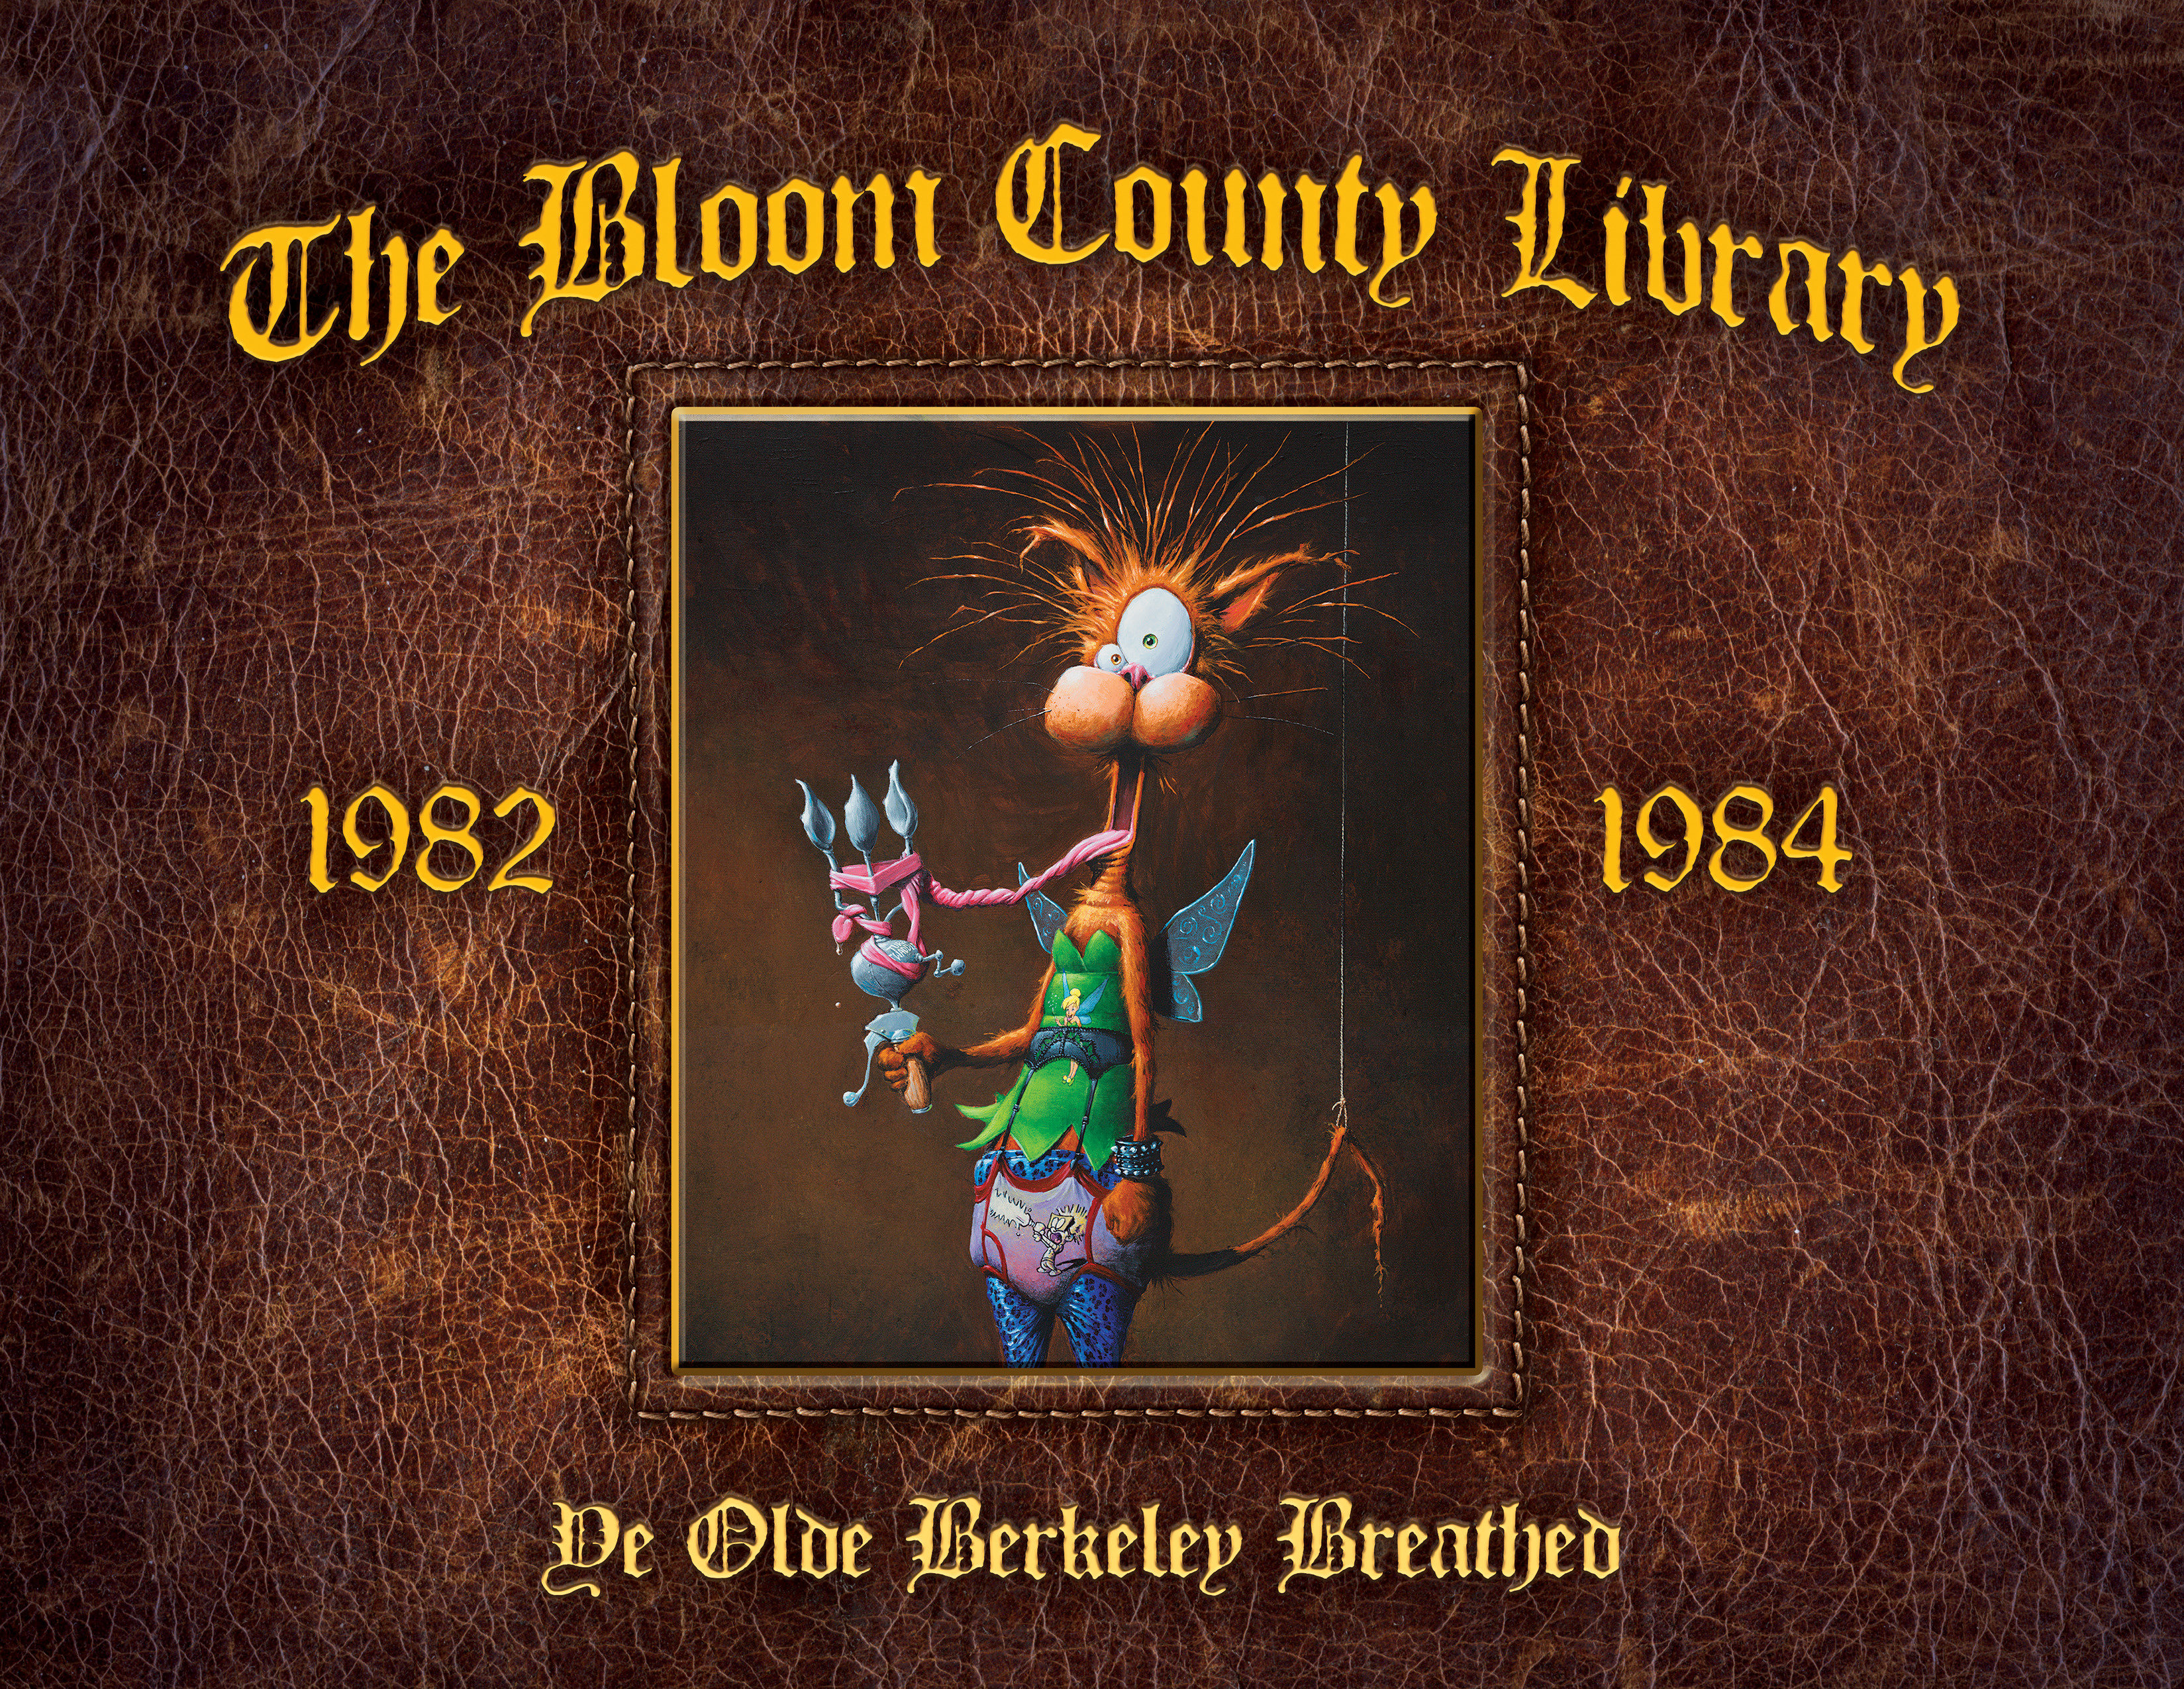 Bloom County Library Graphic Novel Volume 2